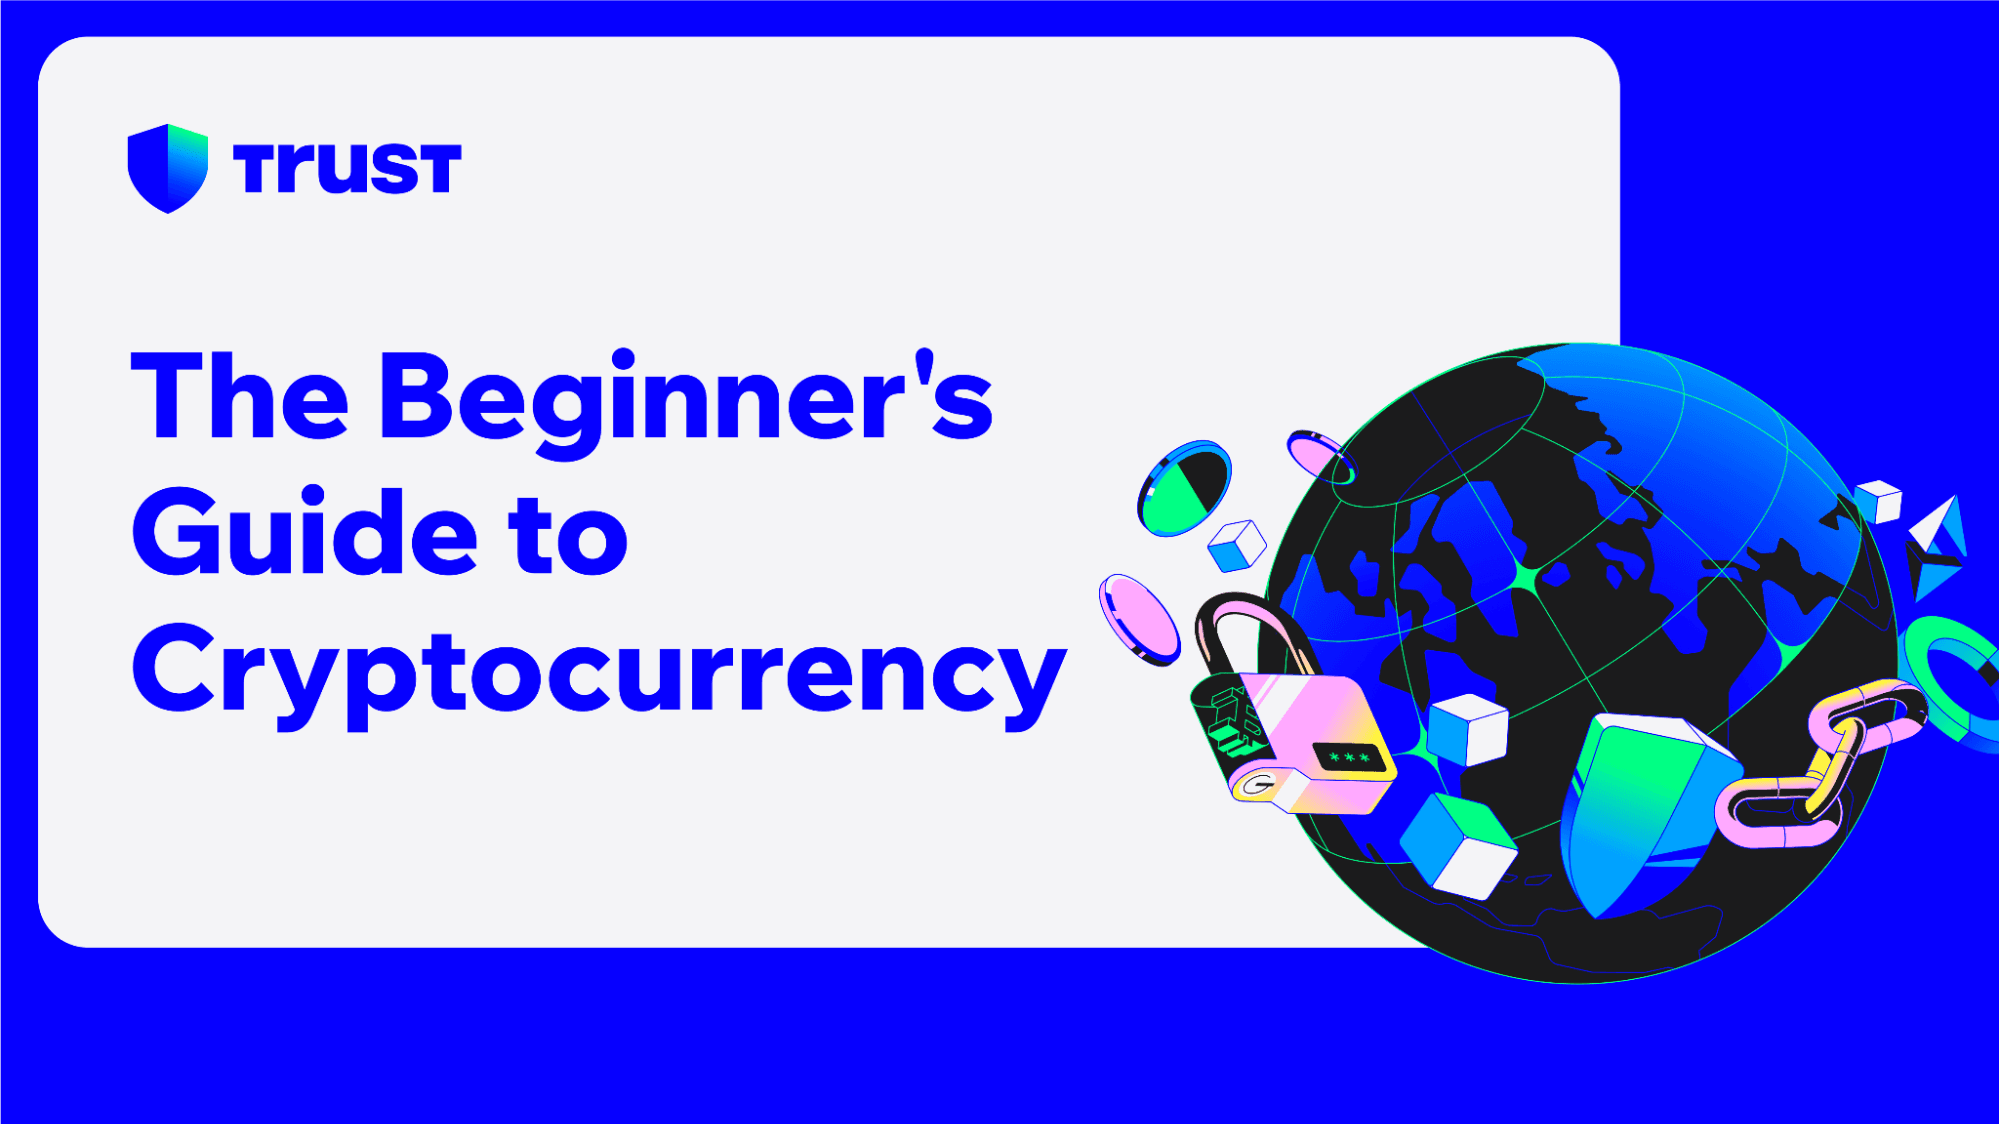 The Beginner's Guide to Cryptocurrency